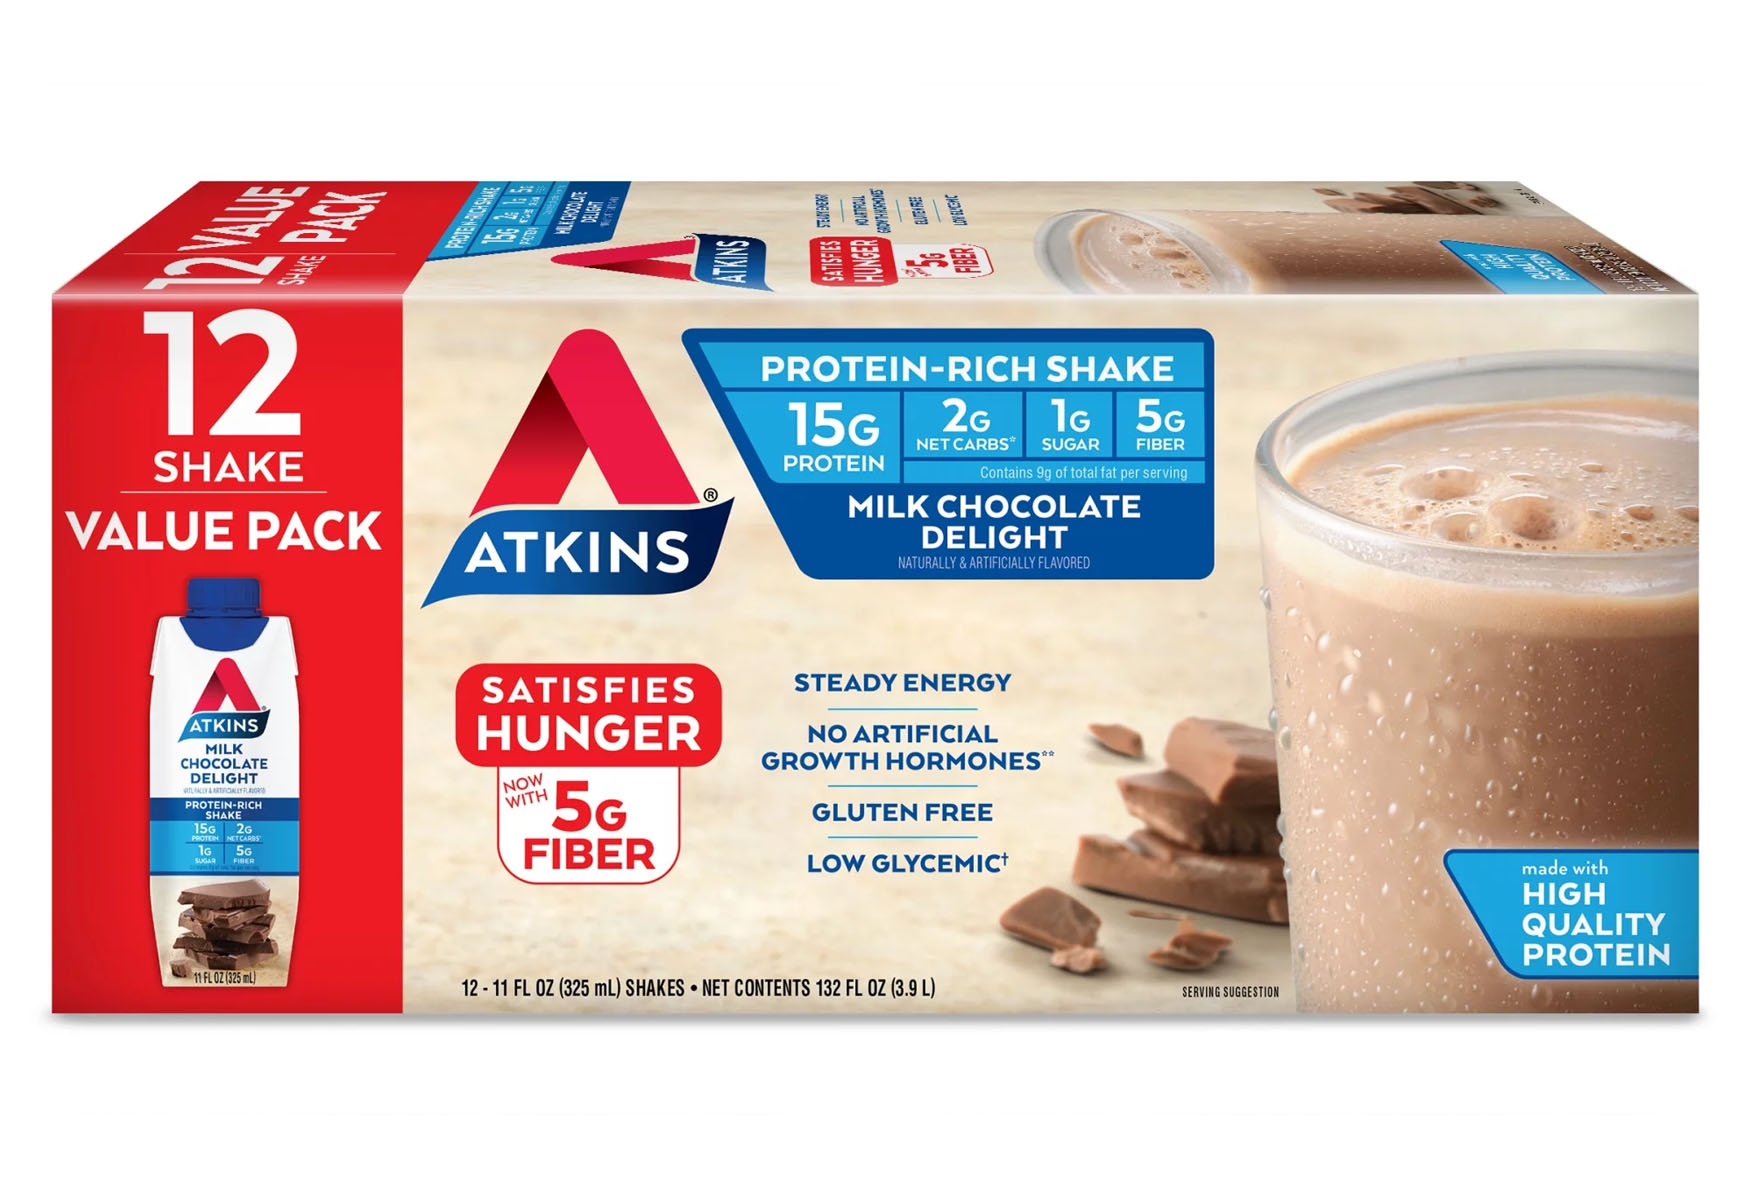 10-atkins-protein-shake-nutrition-facts